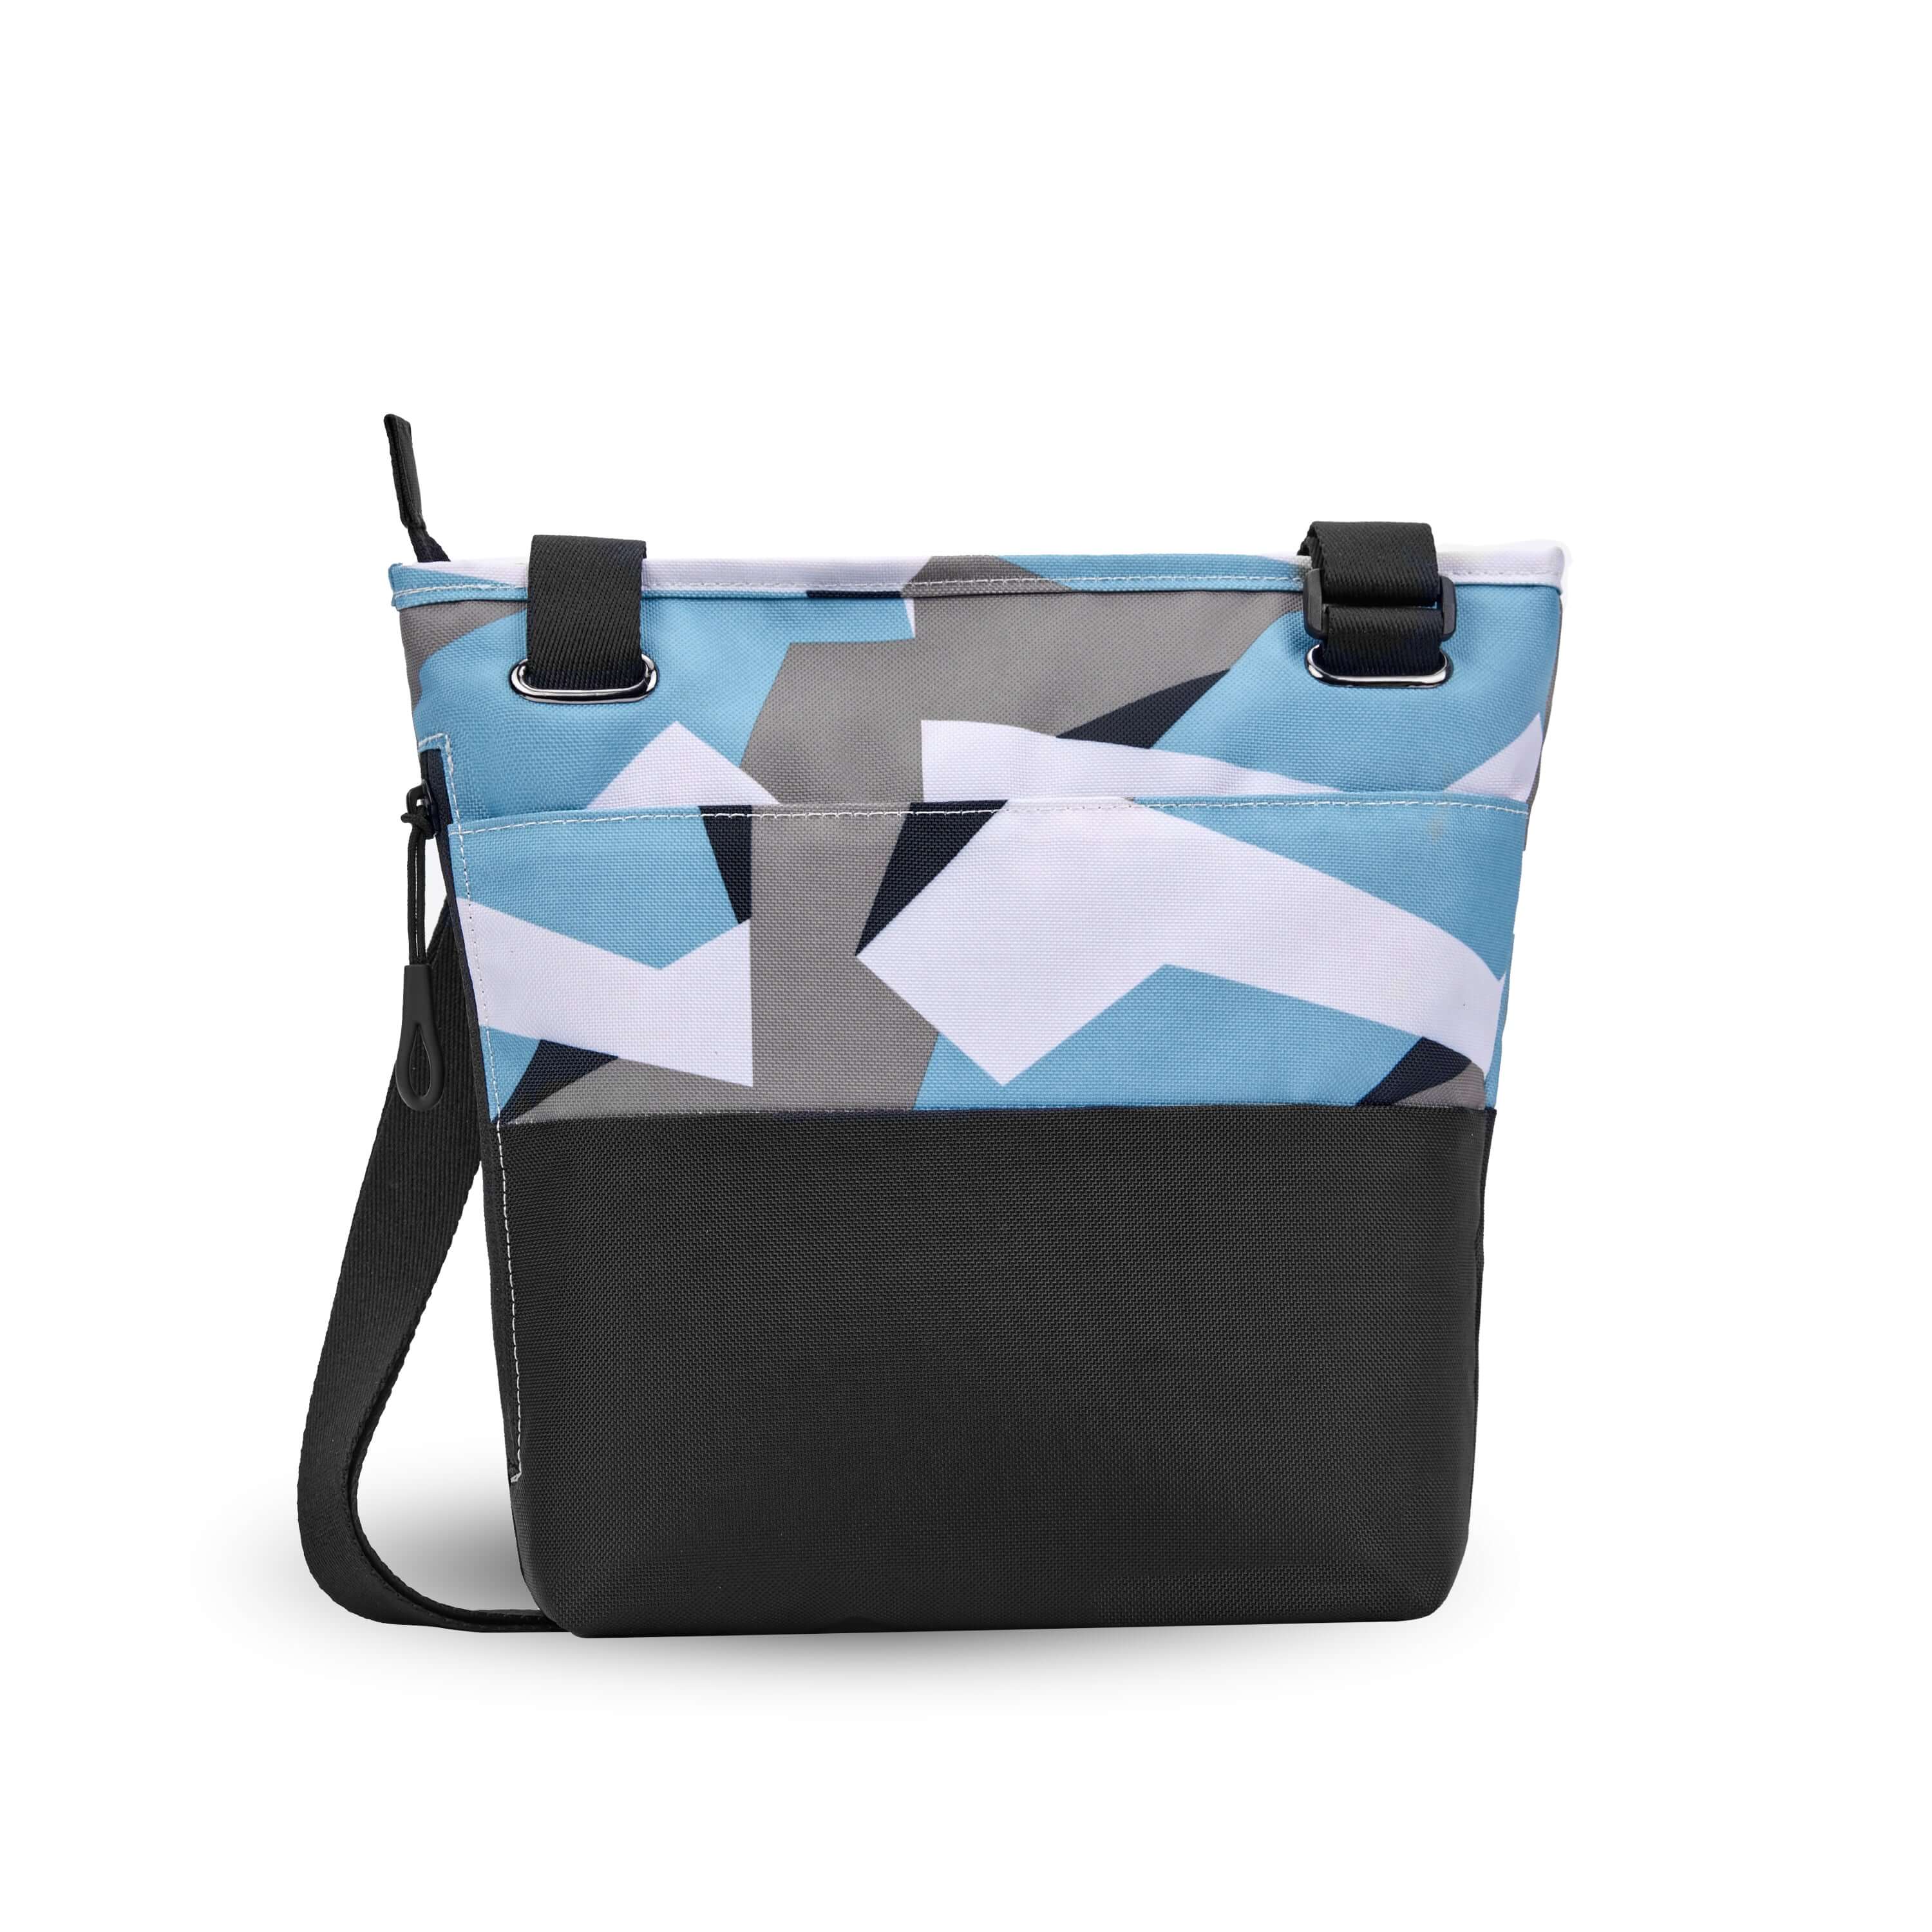 Back view of Sherpani’s crossbody, the Sadie, in Summer Camo. The top half of the bag is a camouflage pattern of white, gray and light blue, the bottom half of the bag is black. There is an external pocket on the back. A zipper pocket sits on one side with an easy pull zipper that is accented in black. The bag has an adjustable crossbody strap. 